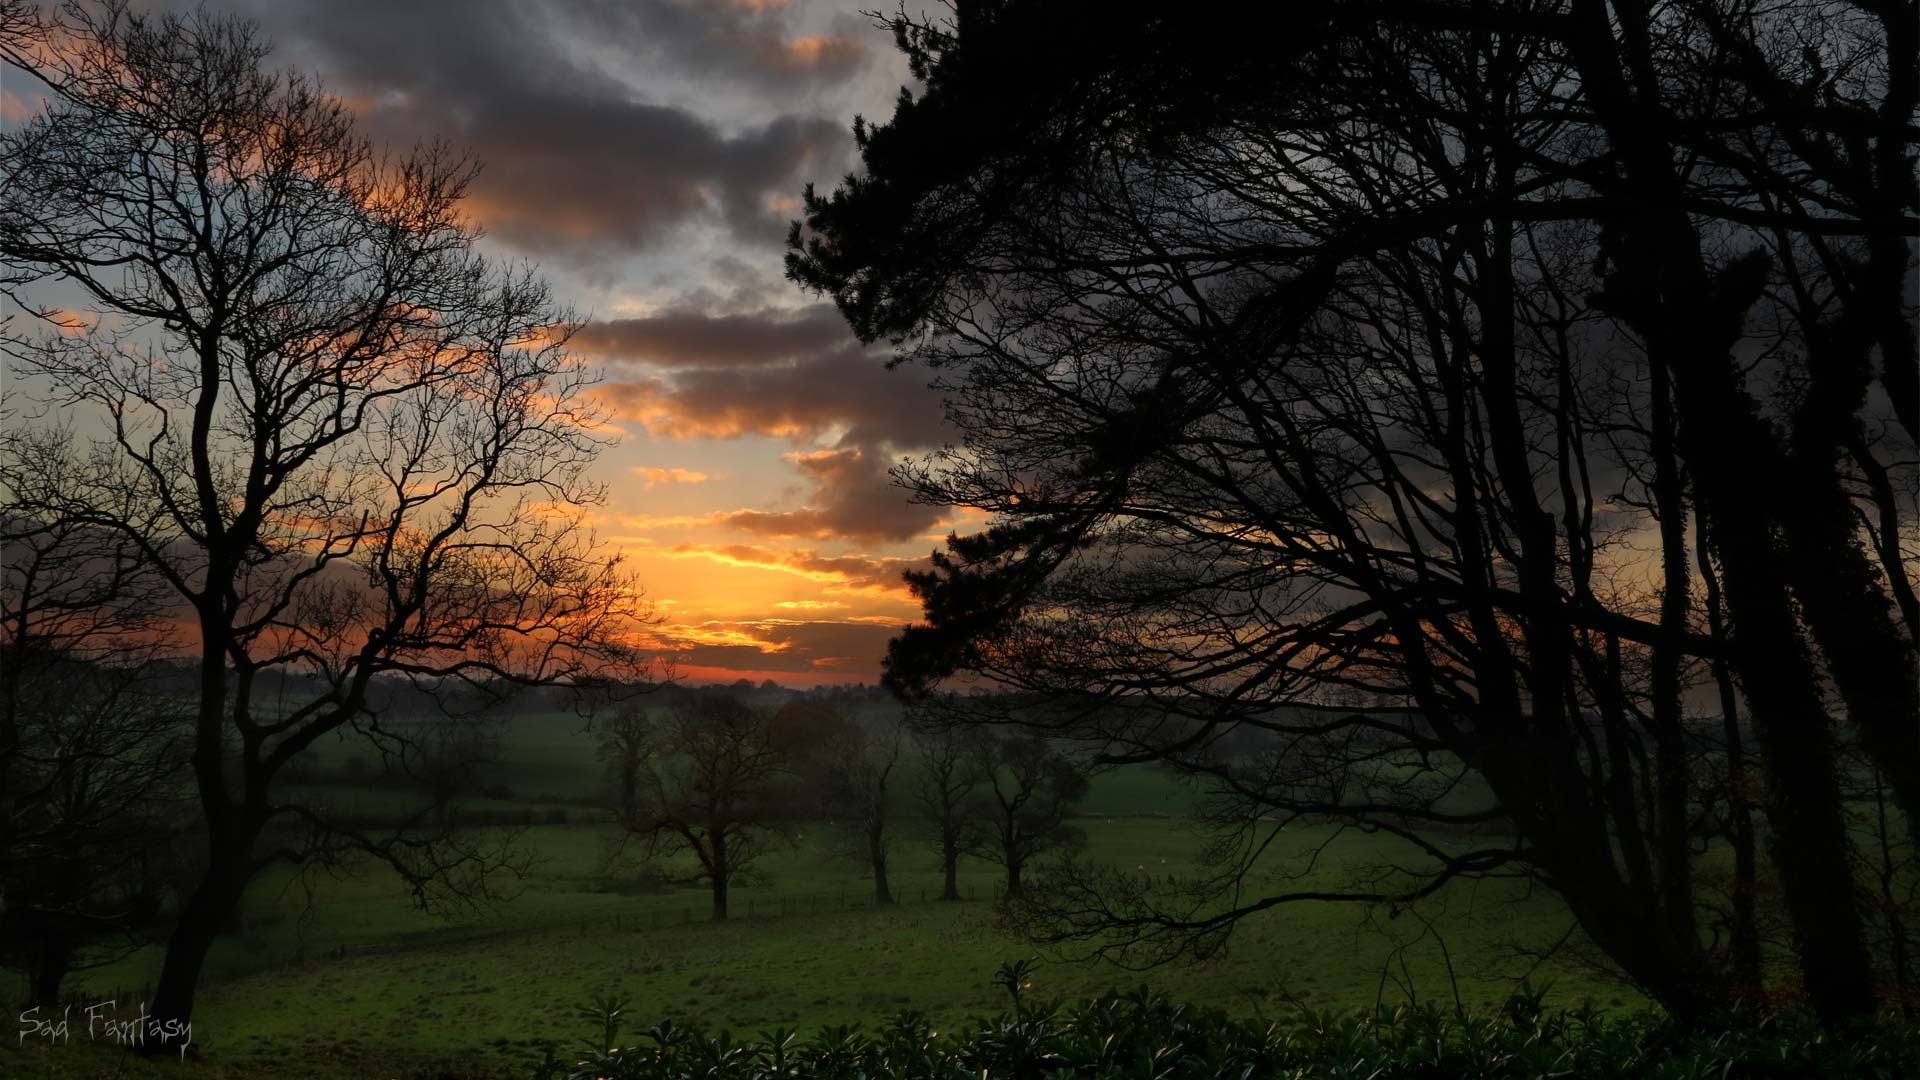 HDR photograph of early spring scene with sunset stormy sky by Sad Fantasy